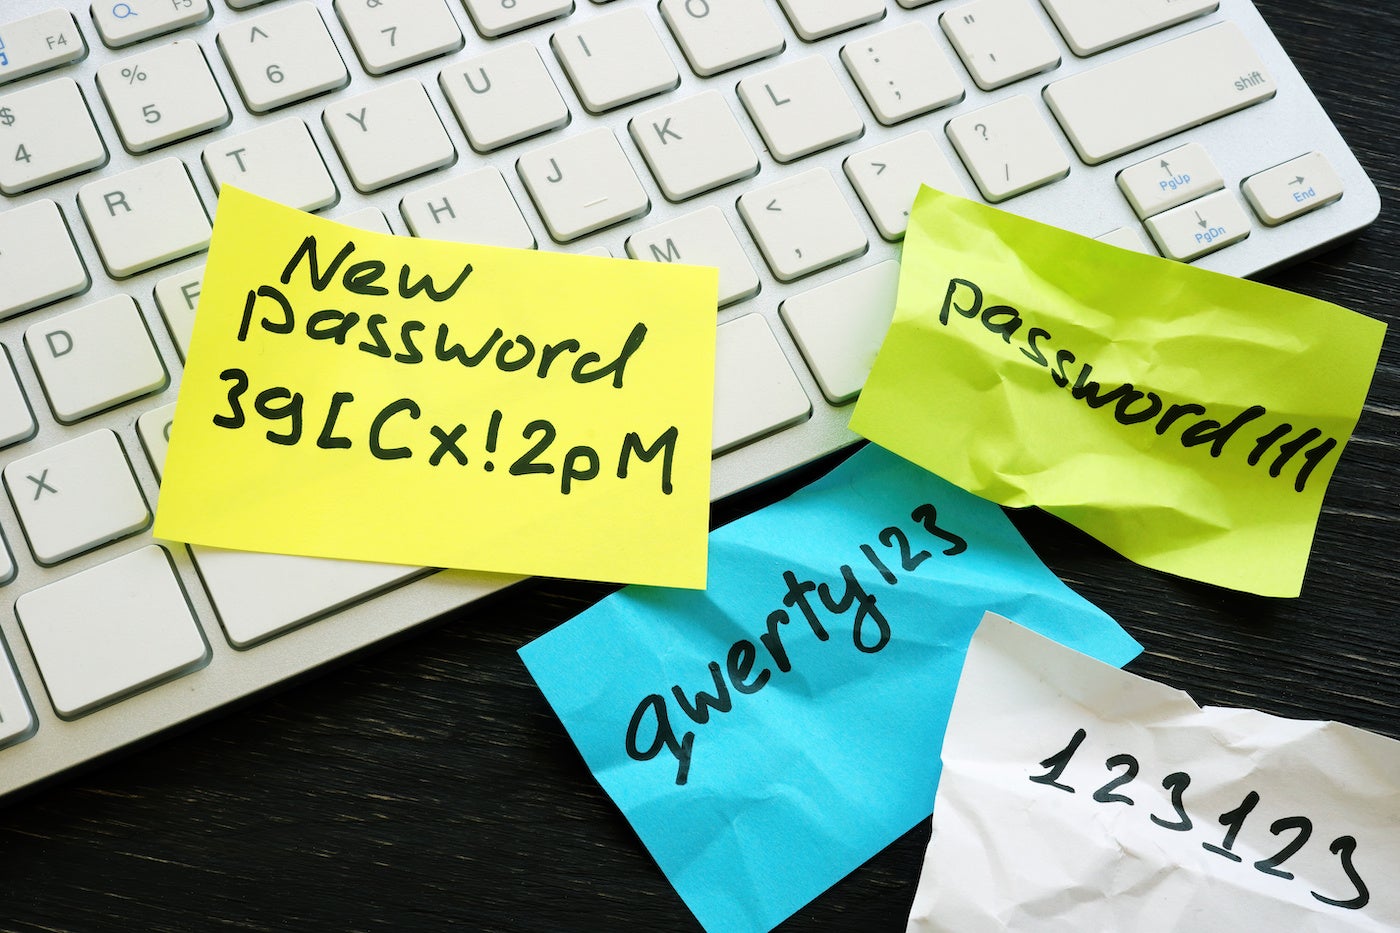 The headache of changing passwords